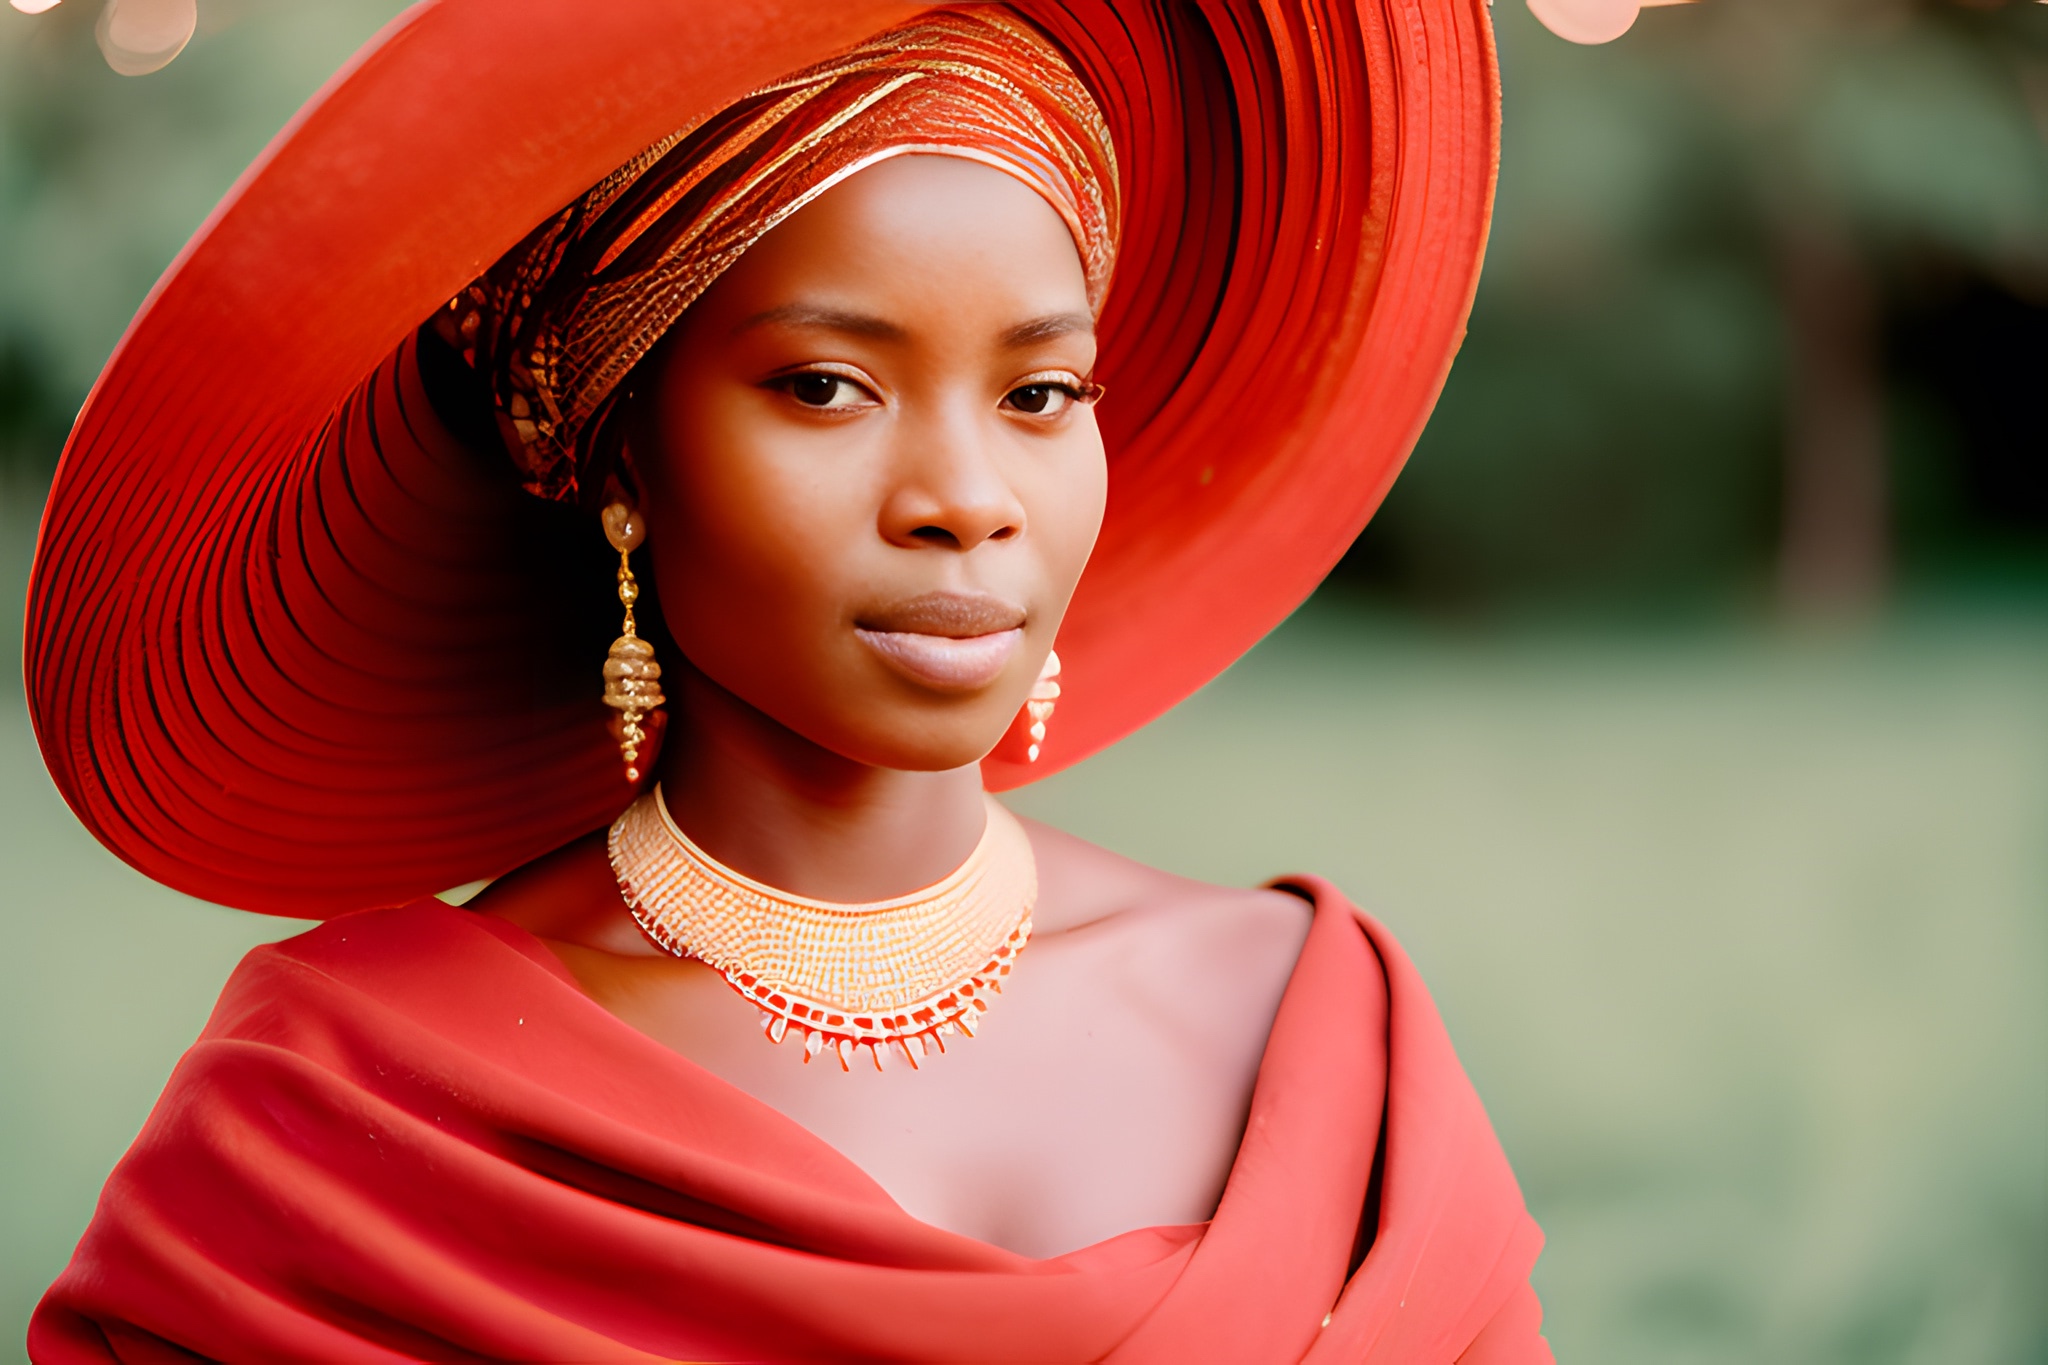 Highly-detailed-portrait-photo-of-a-African-woman-a8qj